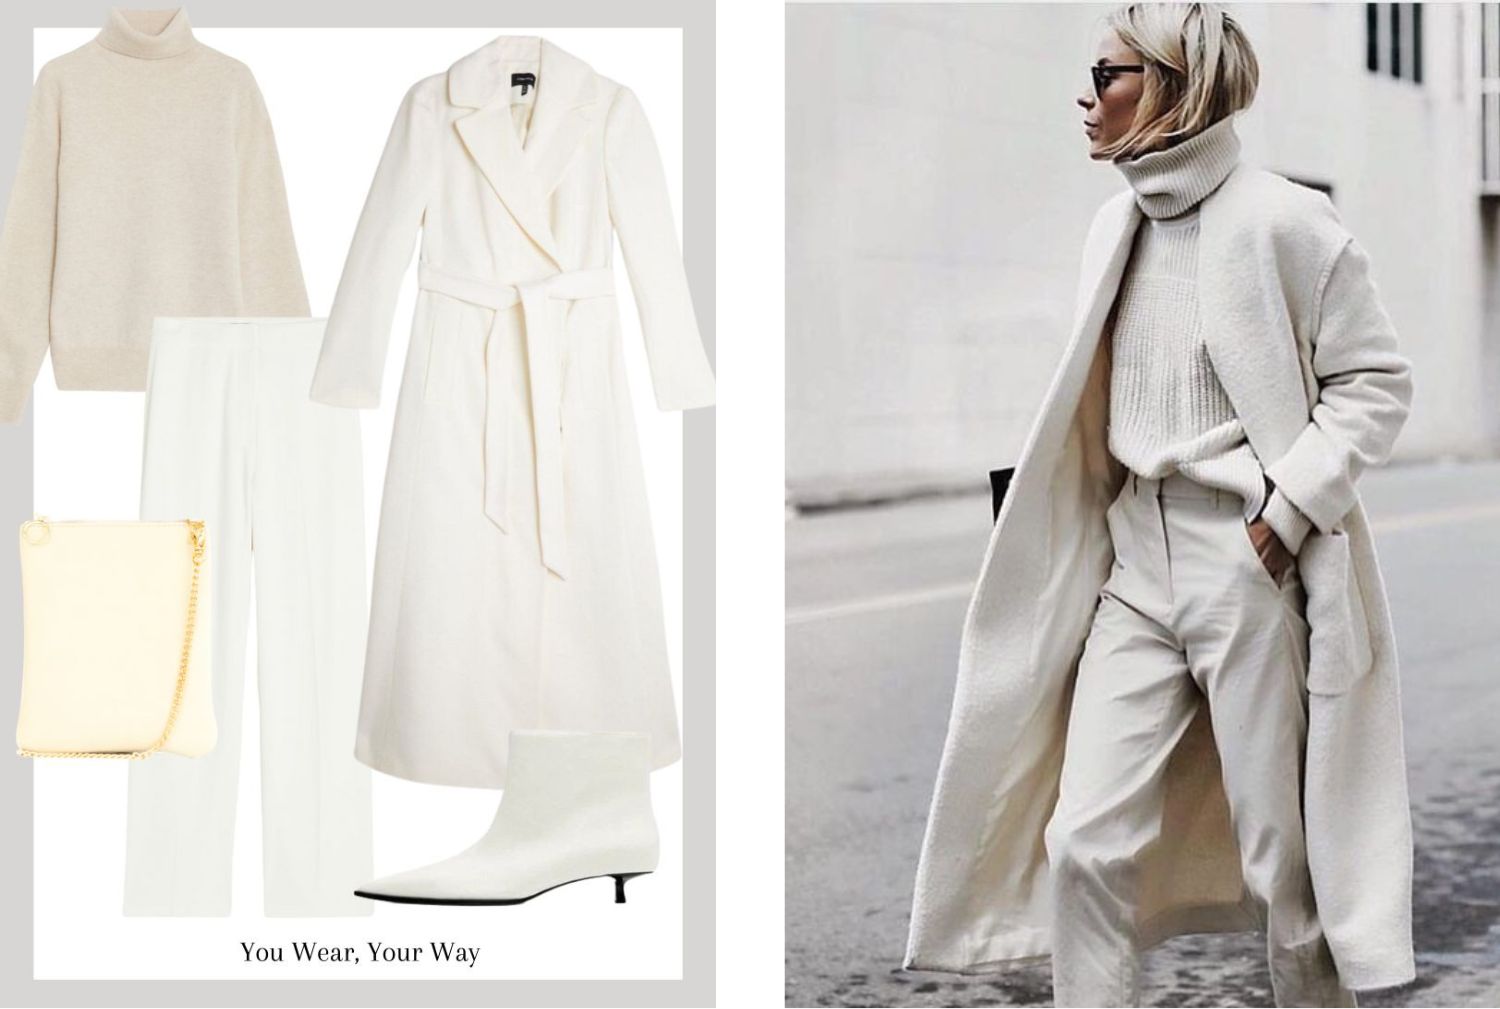 Winter Whites - Get the Look